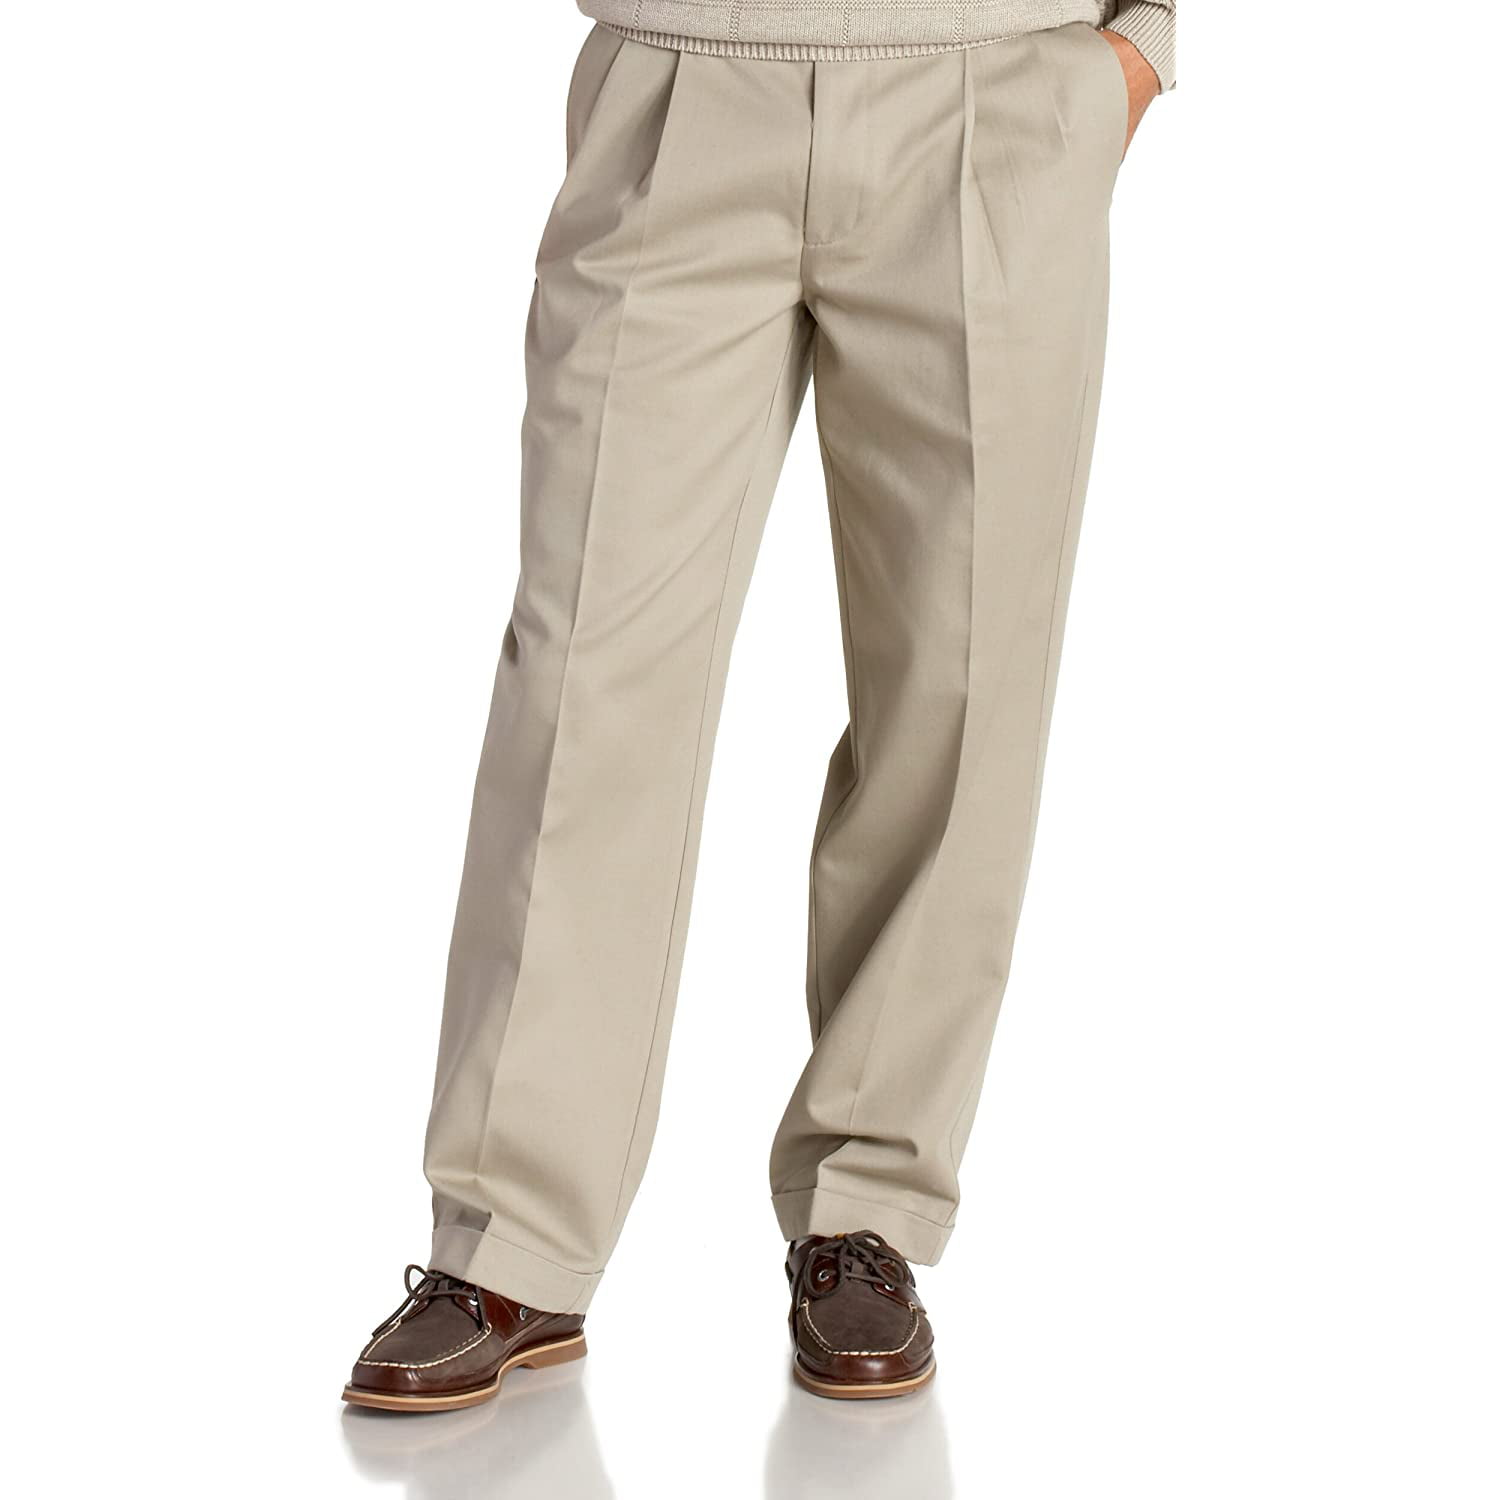 Izod Mens Big and Tall Performance Stretch Pleated Pant